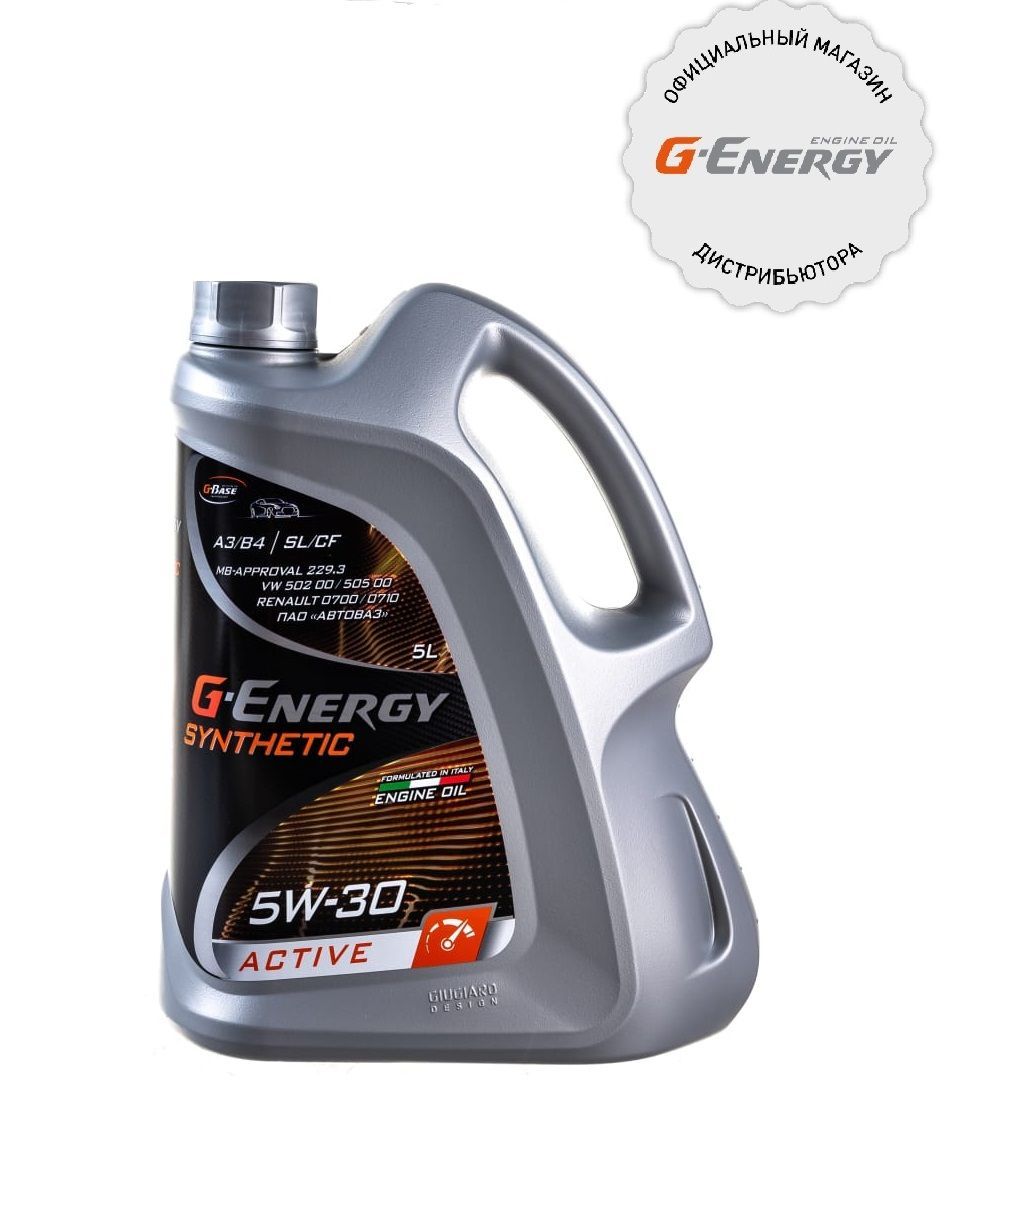 Energy synthetic active 5w 30. Масло g-Energy Syntetic Activ 5w30. G-Energy Synthetic far East 5w-30. Масло g-Energy 5w30 c3.